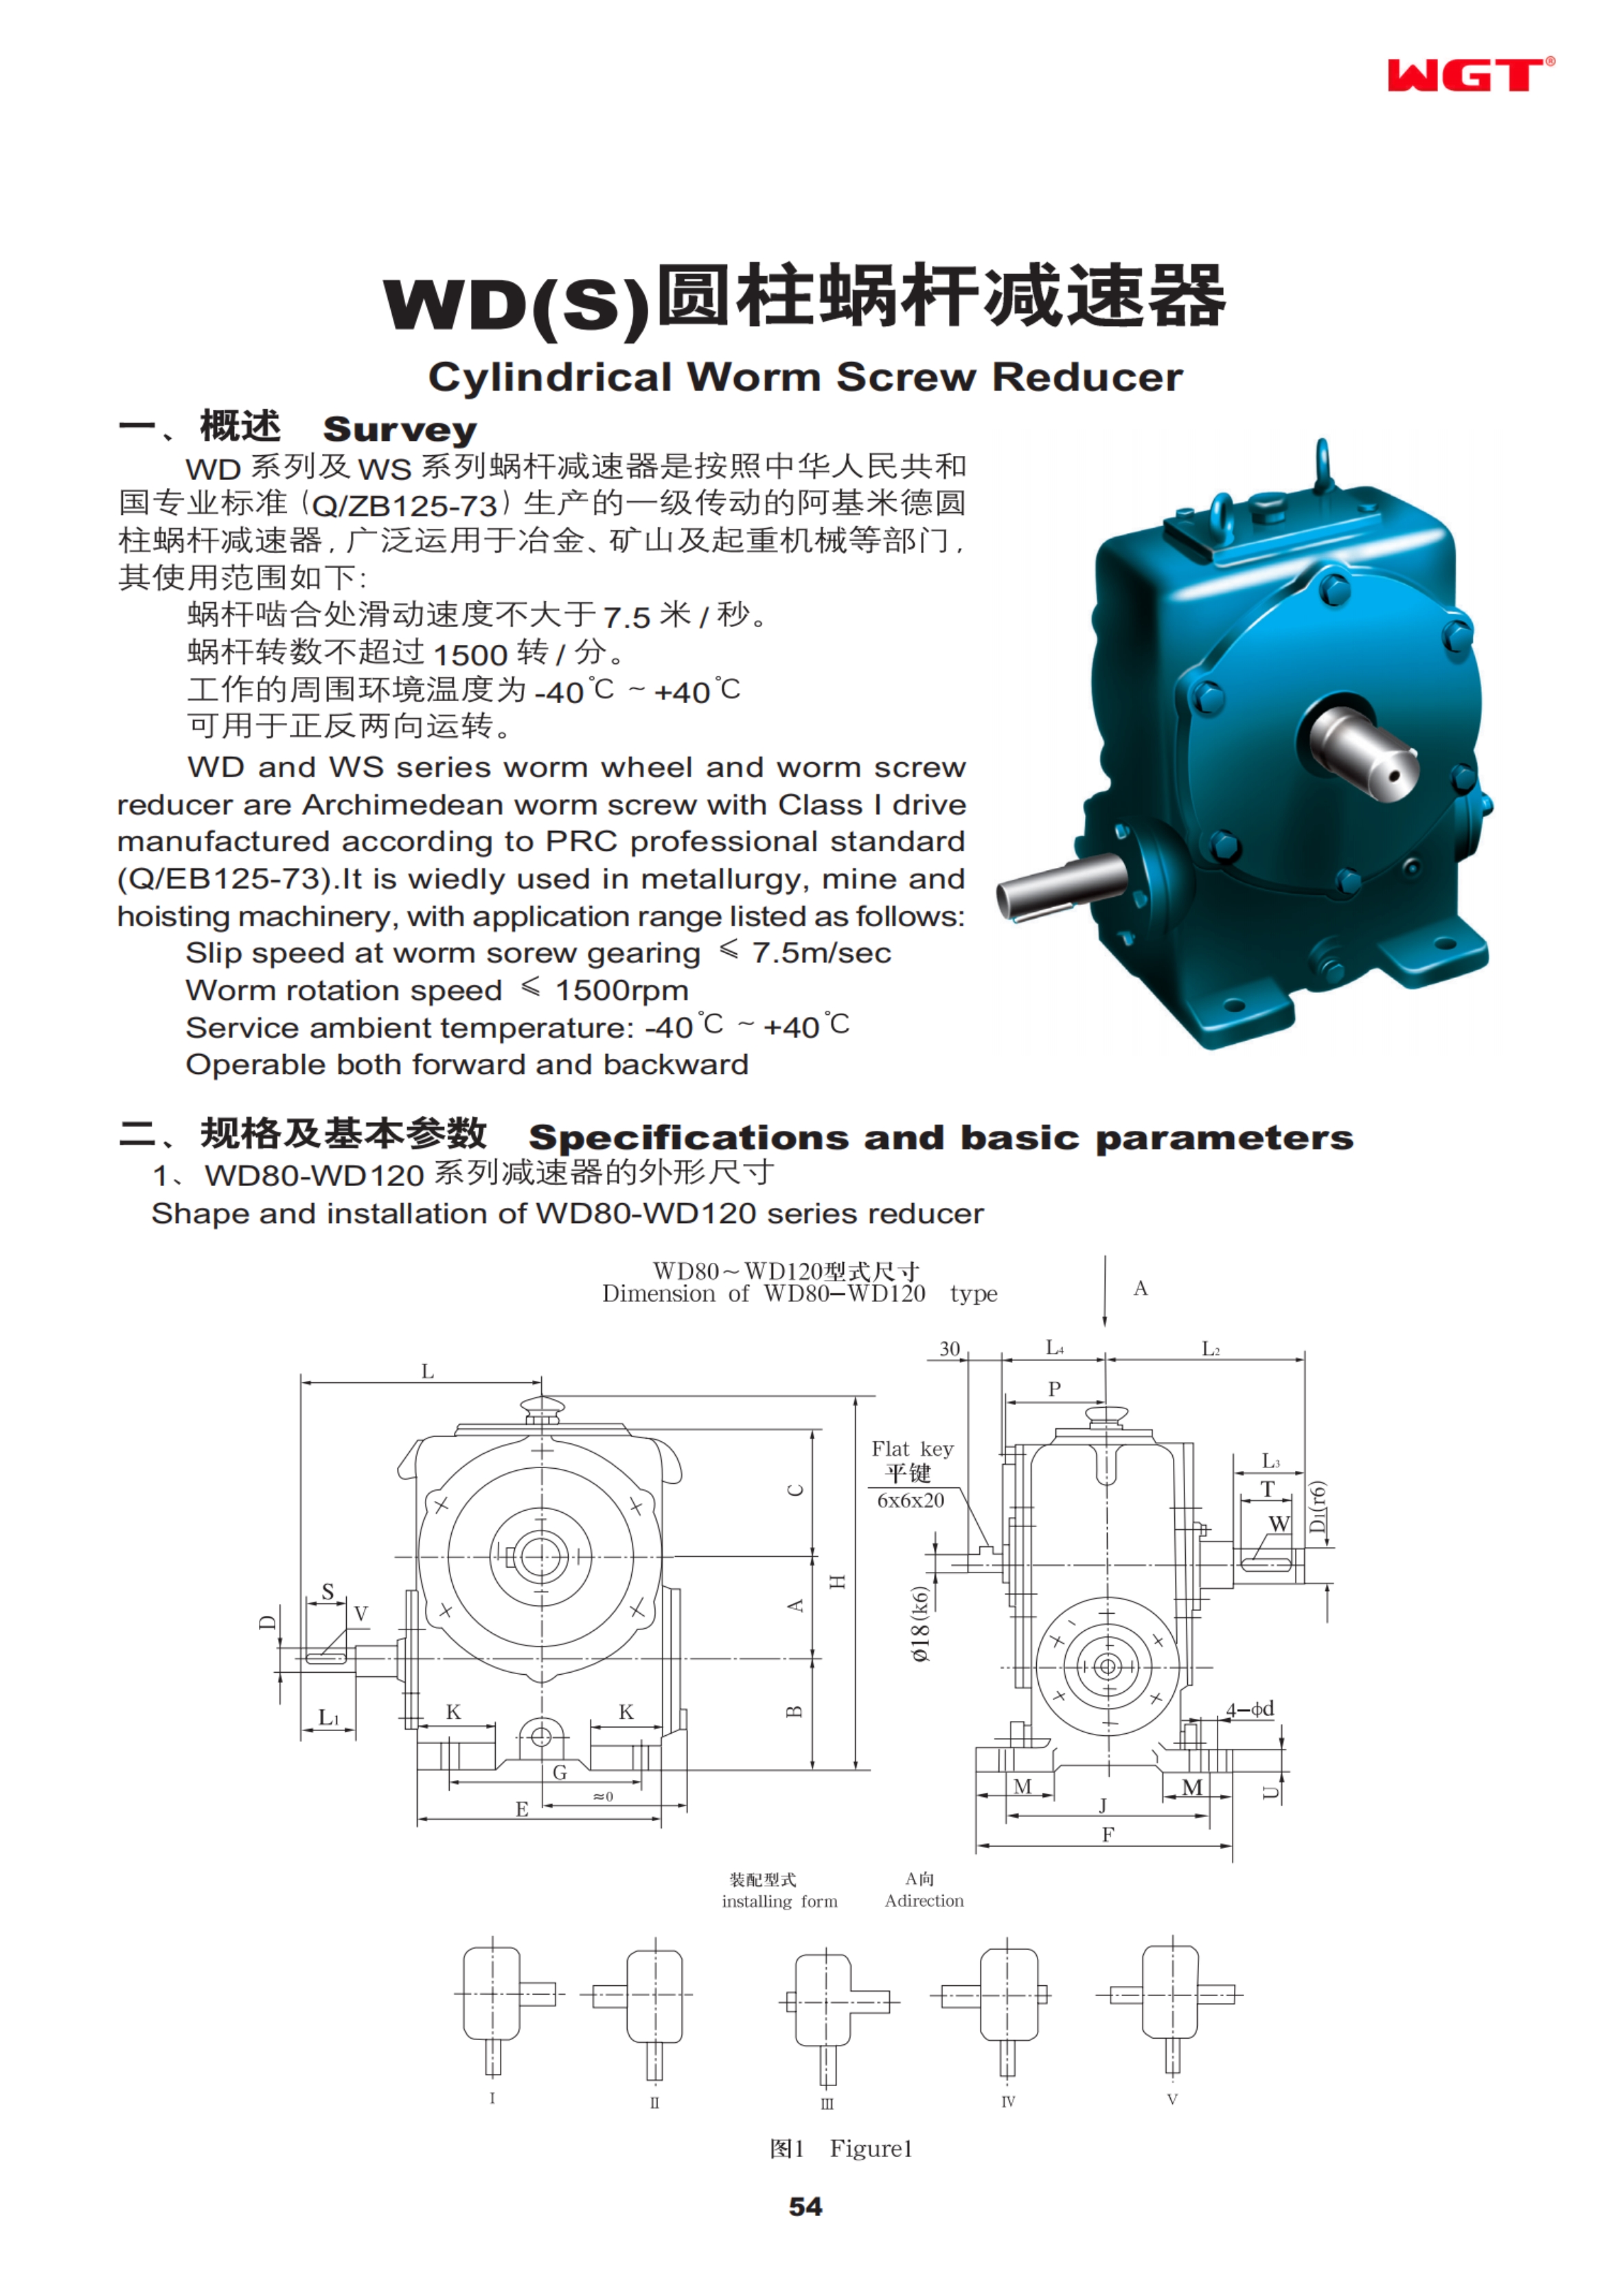 WD100 cylindrical worm reducer WGT